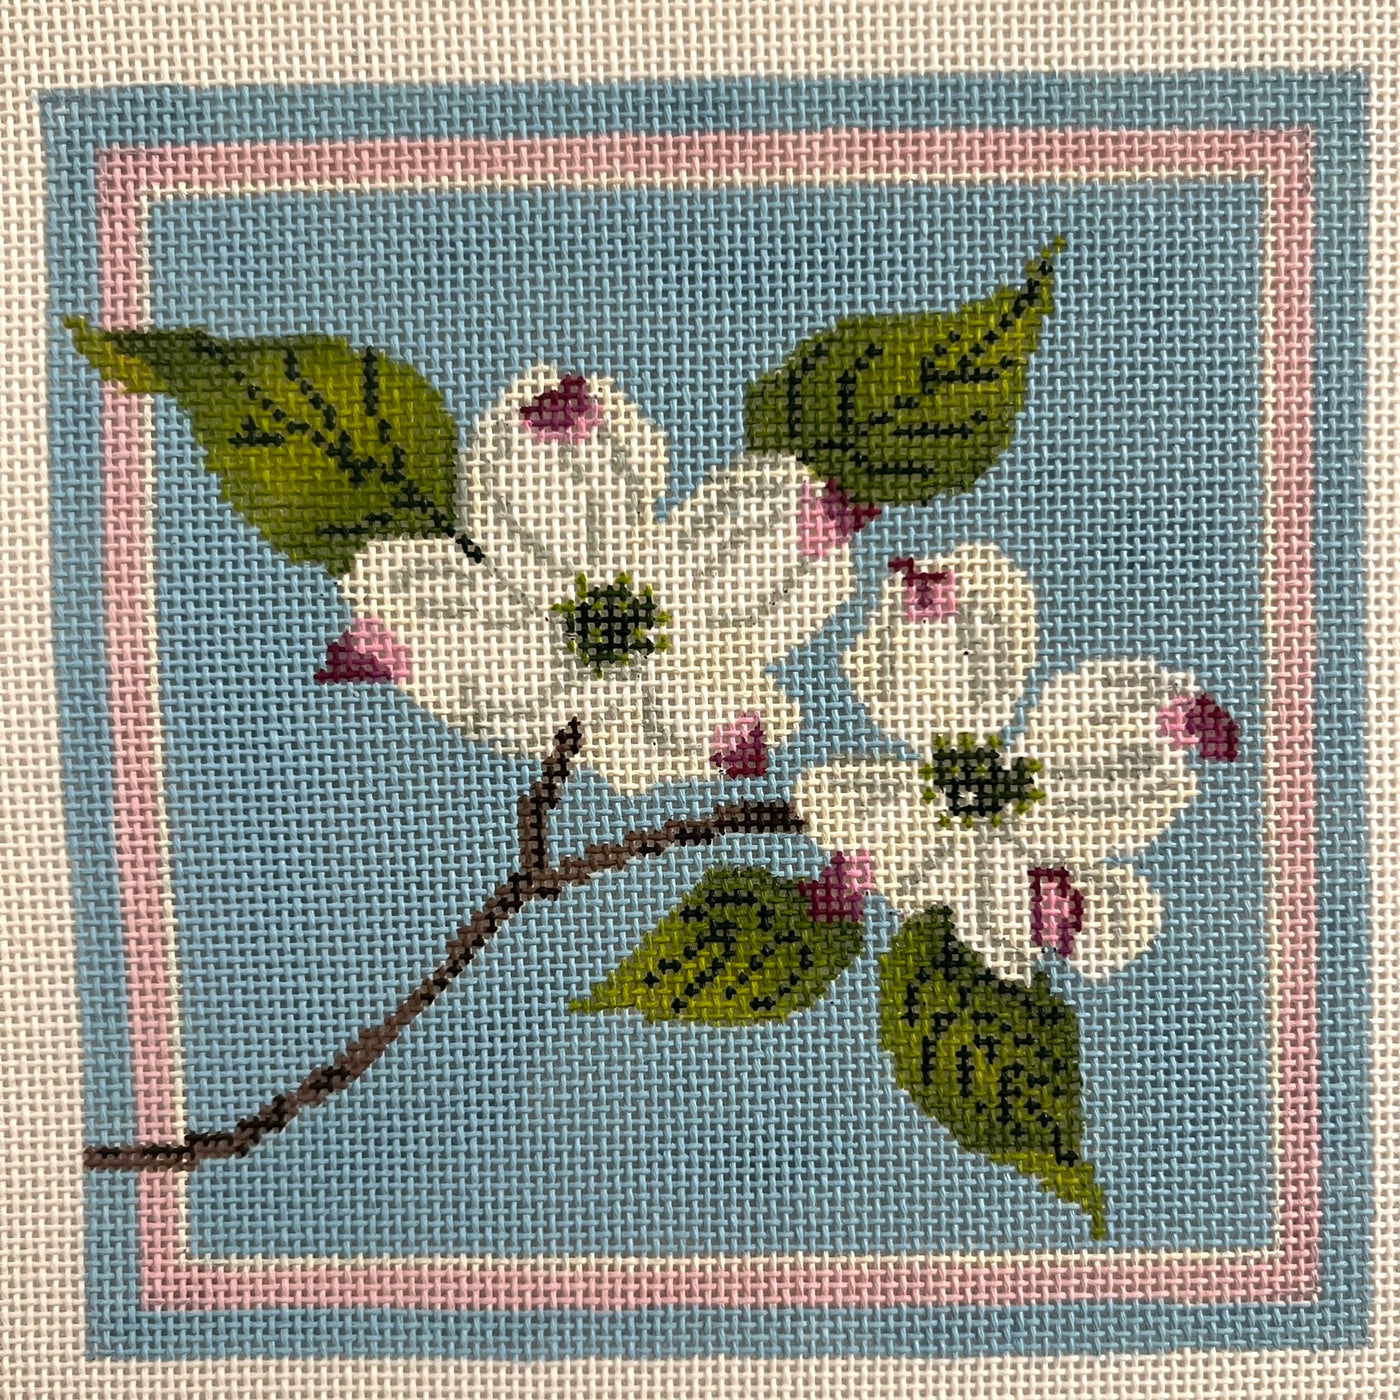 Orchid on Blue Square Needlepoint Canvas